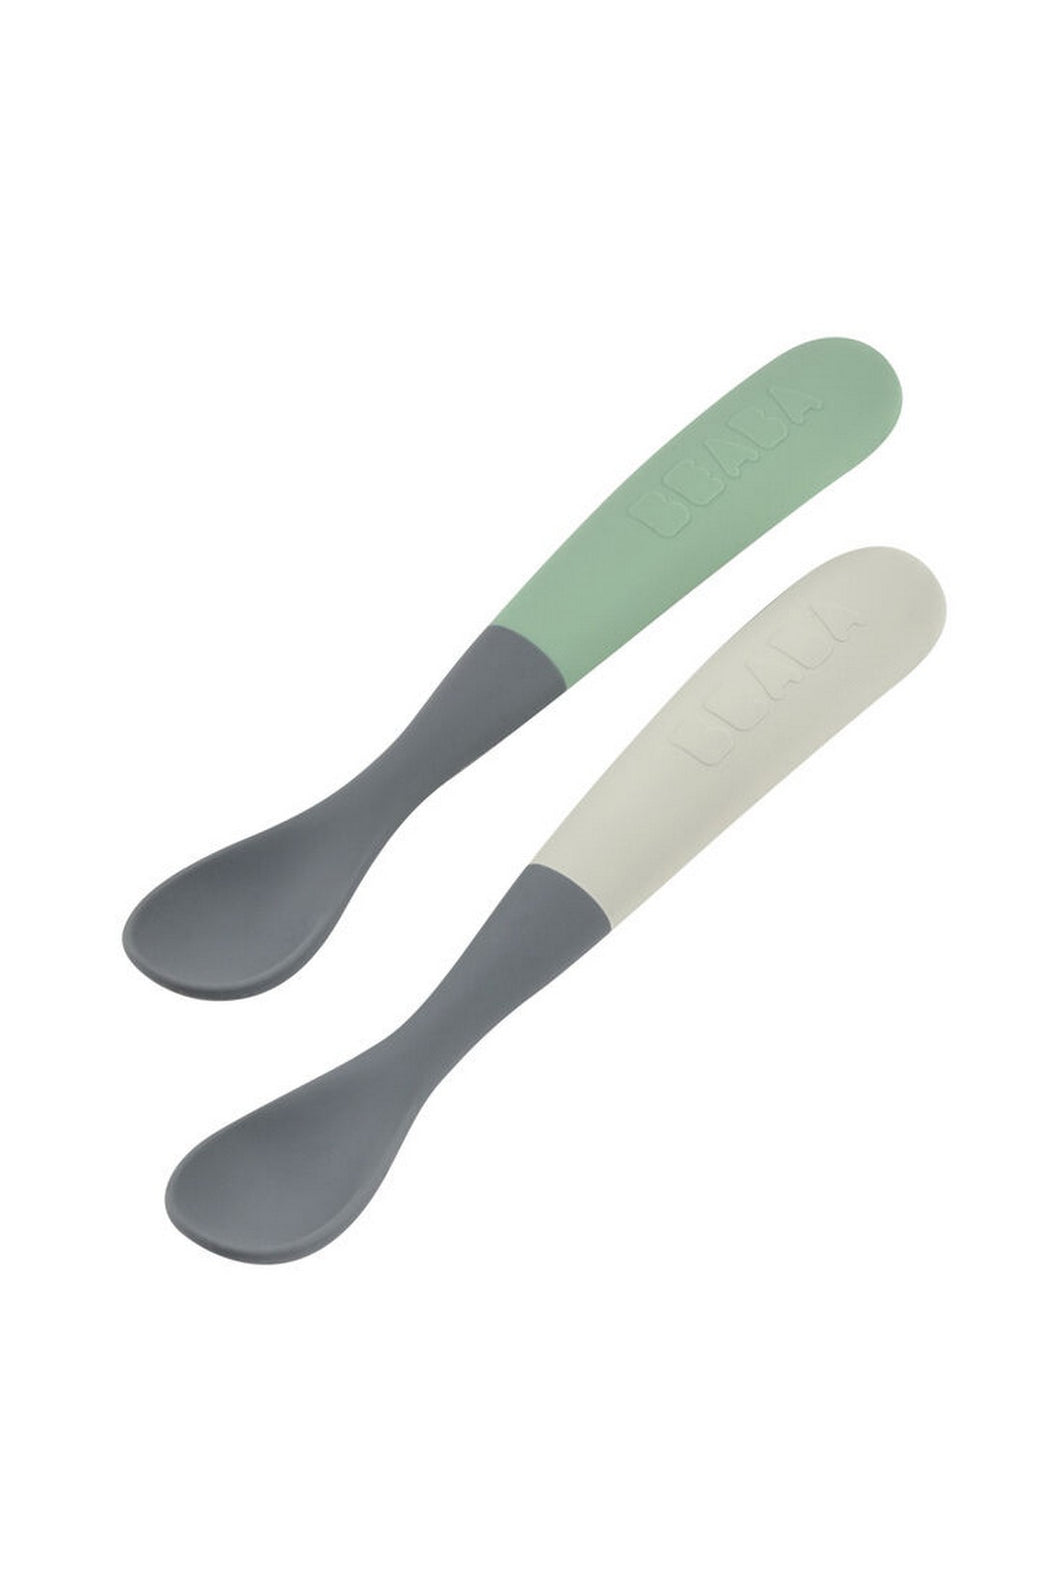 Beaba 1st Stage Silcone Spoon 2pcs Tone Mineral Sage Green 1